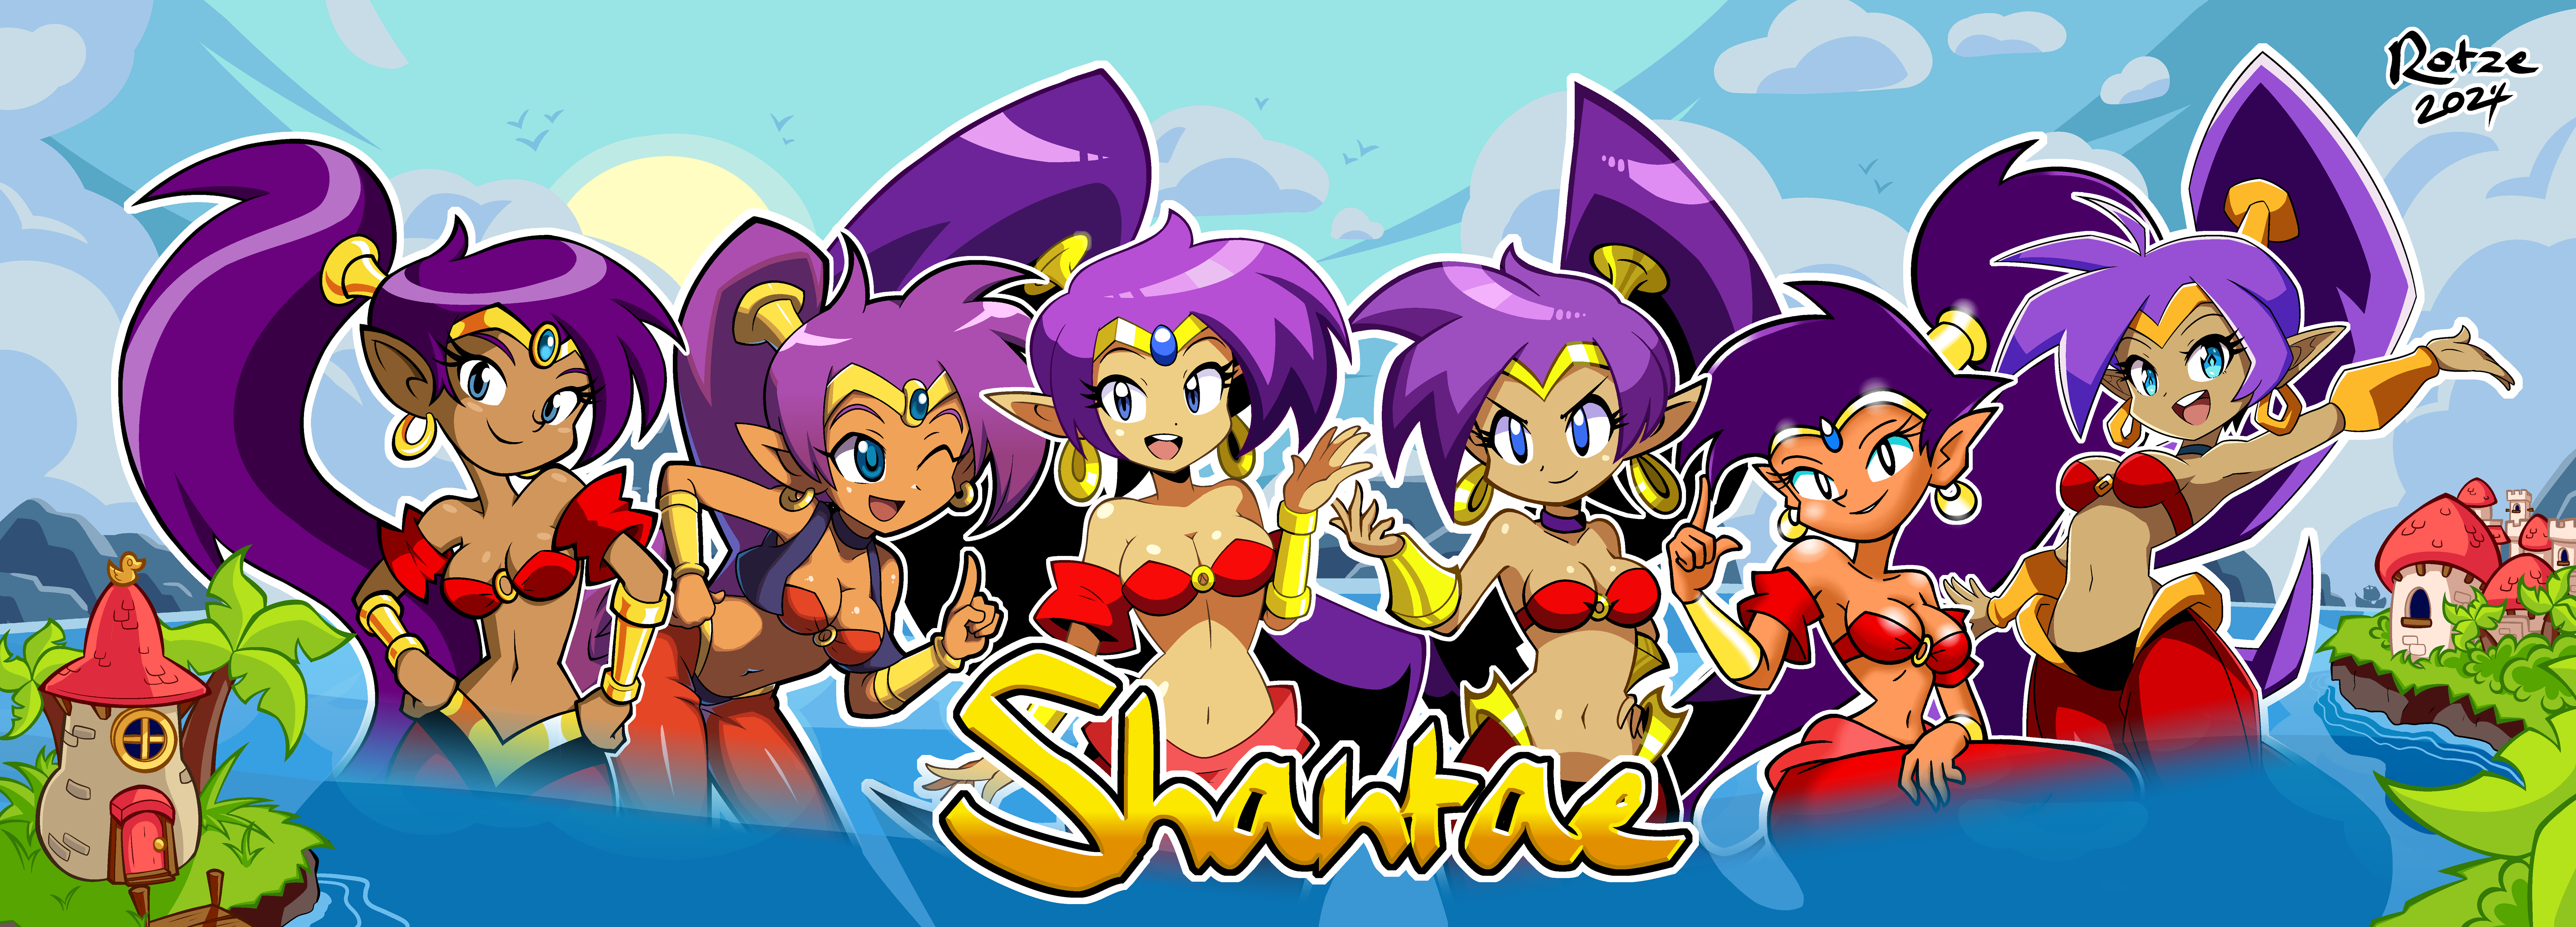 General 7500x2700 Shantae Shantae: Risky's Revenge Shantae: Half-Genie Hero Shantae and the Pirate's Curse ponytail purple hair long hair bare midriff belly belly button circlet jewel tiara bracelets armlet boobs big boobs cleavage leaning wink bangs earring jewelry blue eyes purple eyes clouds house palm trees WayForward hands on hips bedroom eyes video games video game characters retro games video game girls castle city pointy ears dark skin